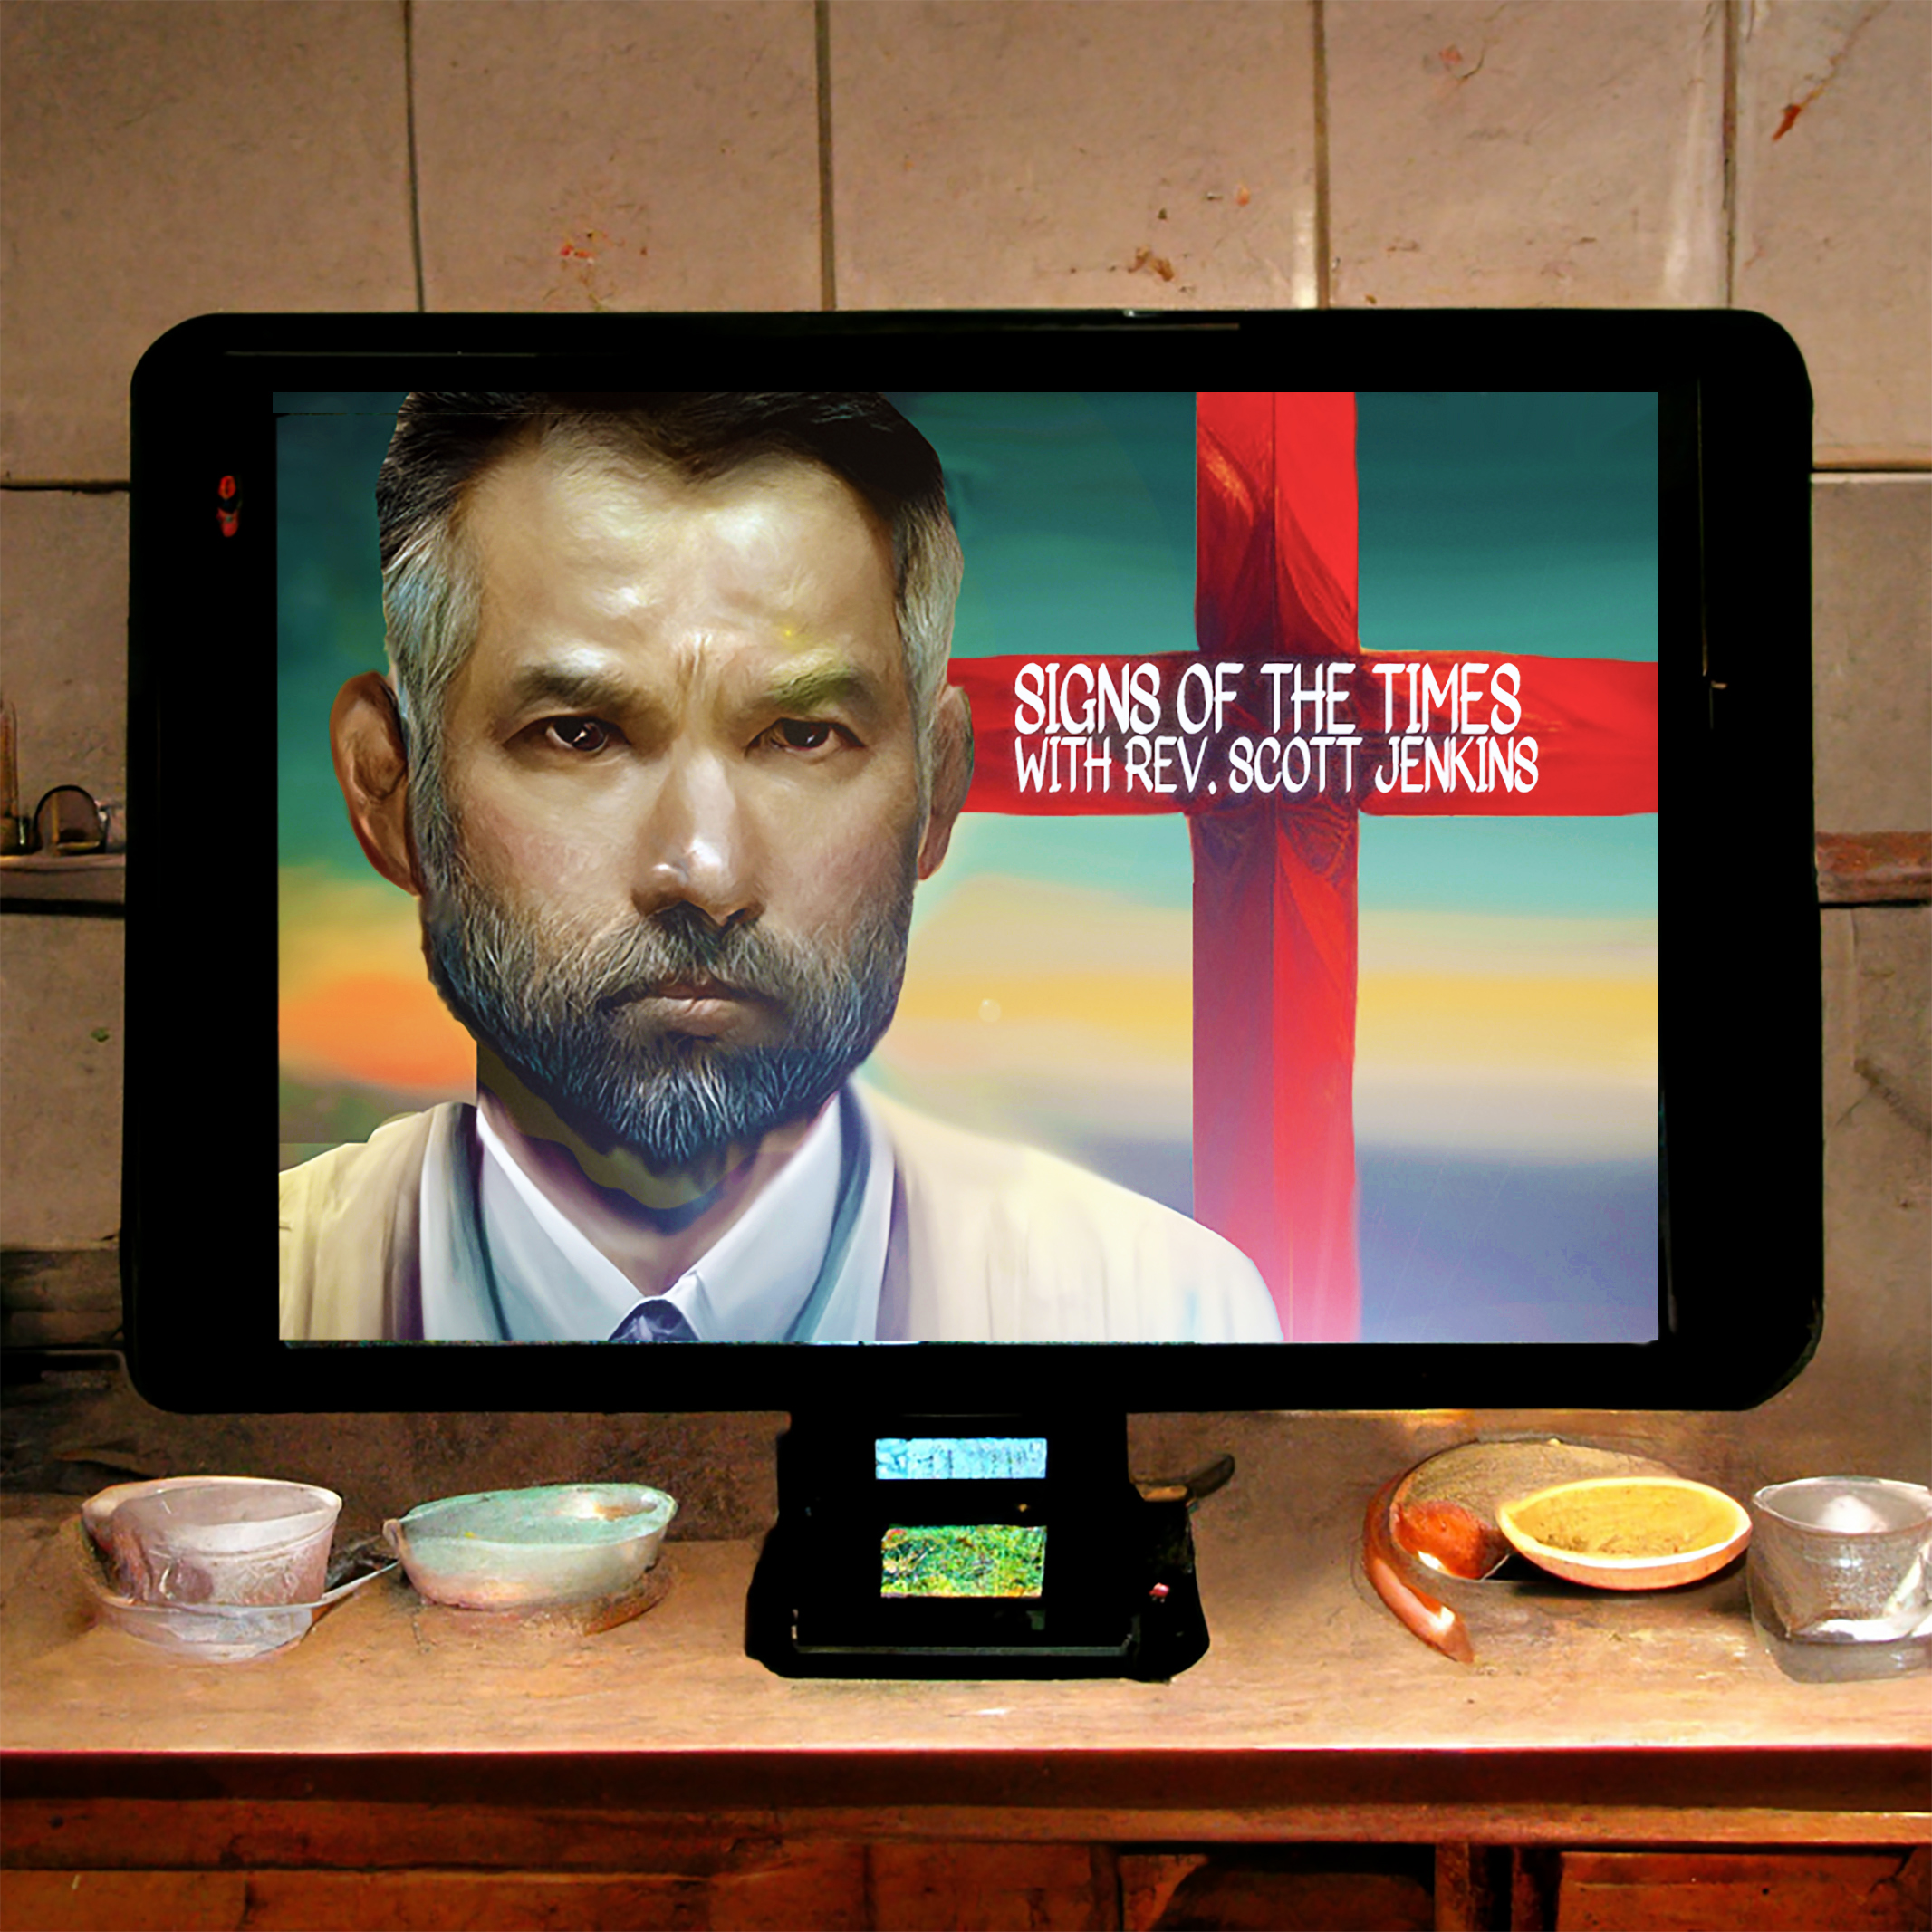 Rev. Scott Jenkins Signs of the Times video on a tablet in a kitchen